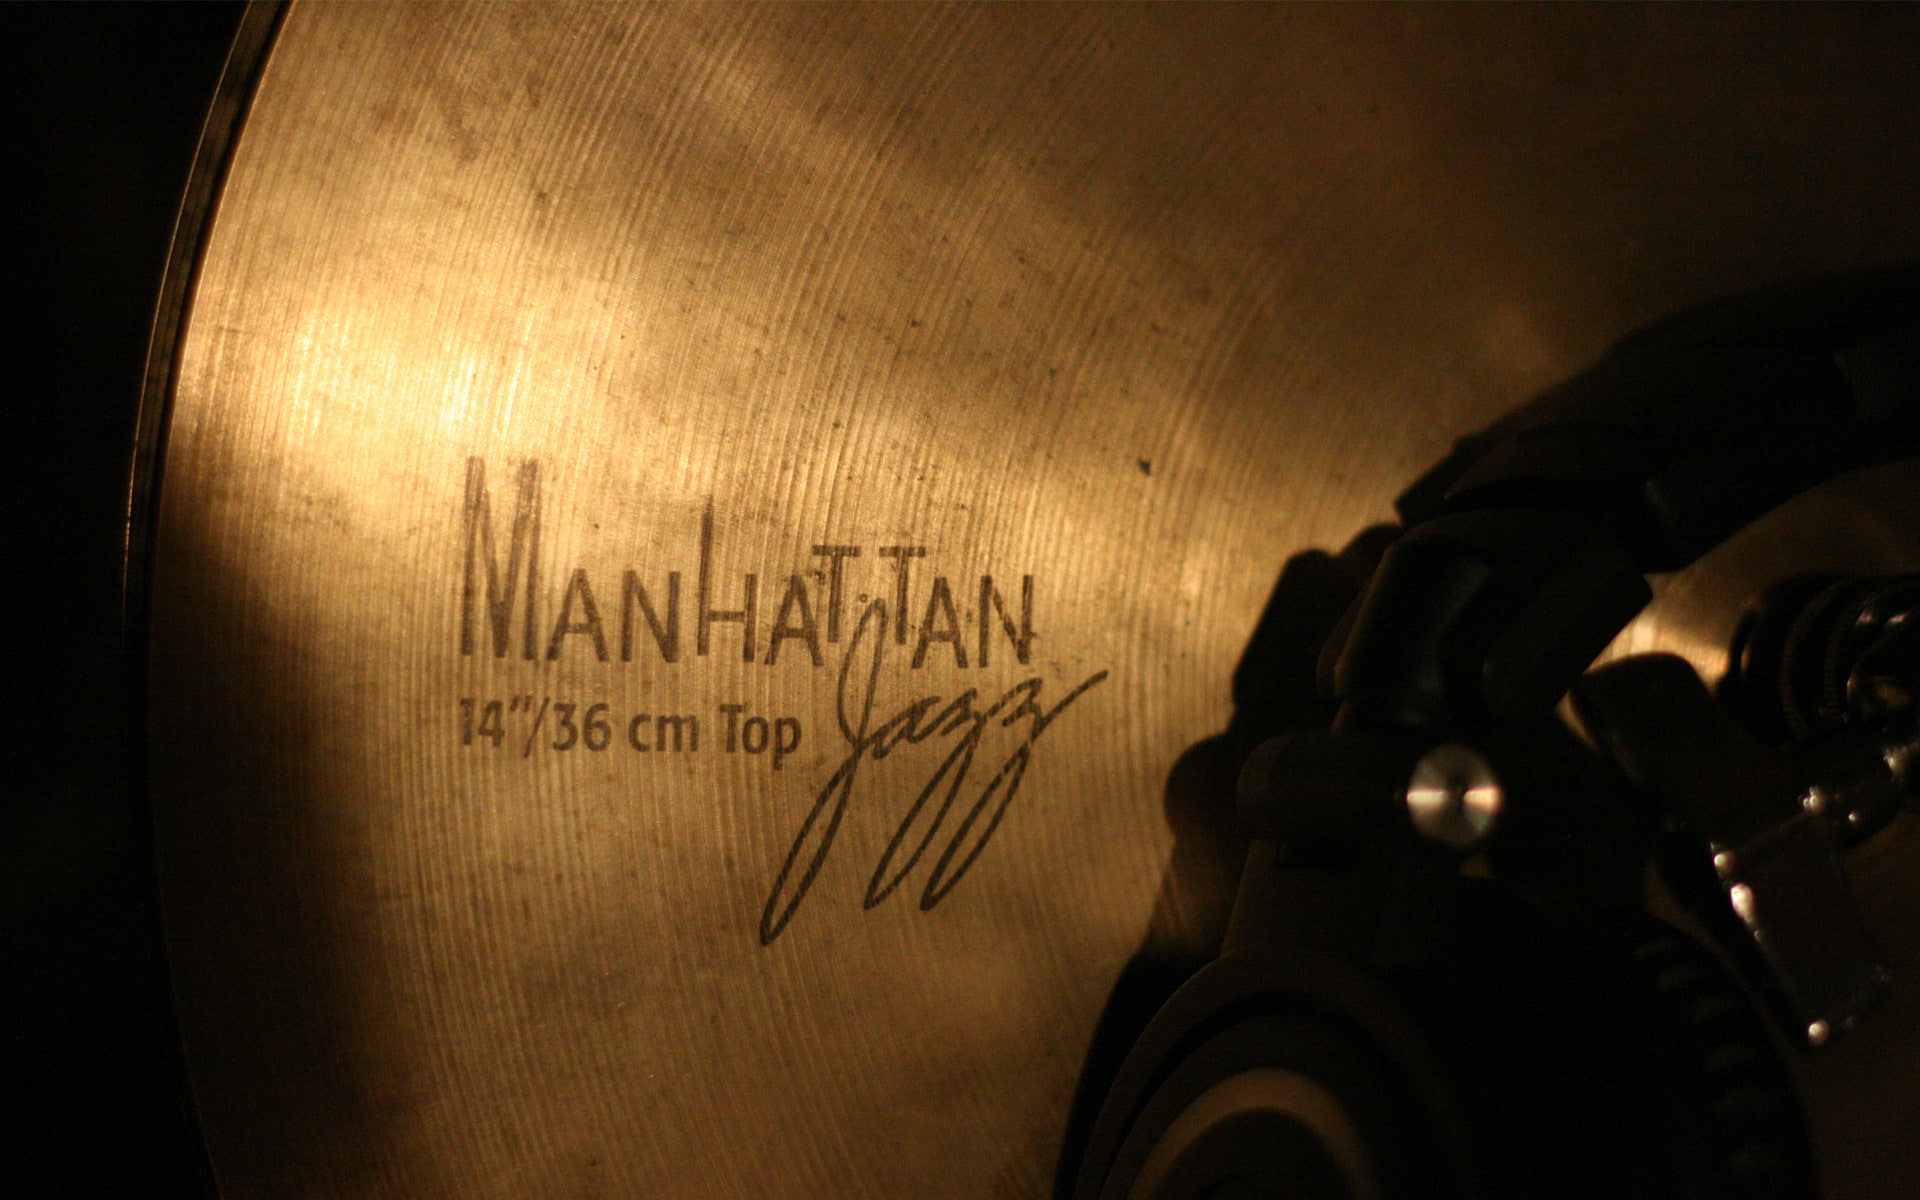 brass-colored Manhattan jazz cymbal, music, the inscription, plate